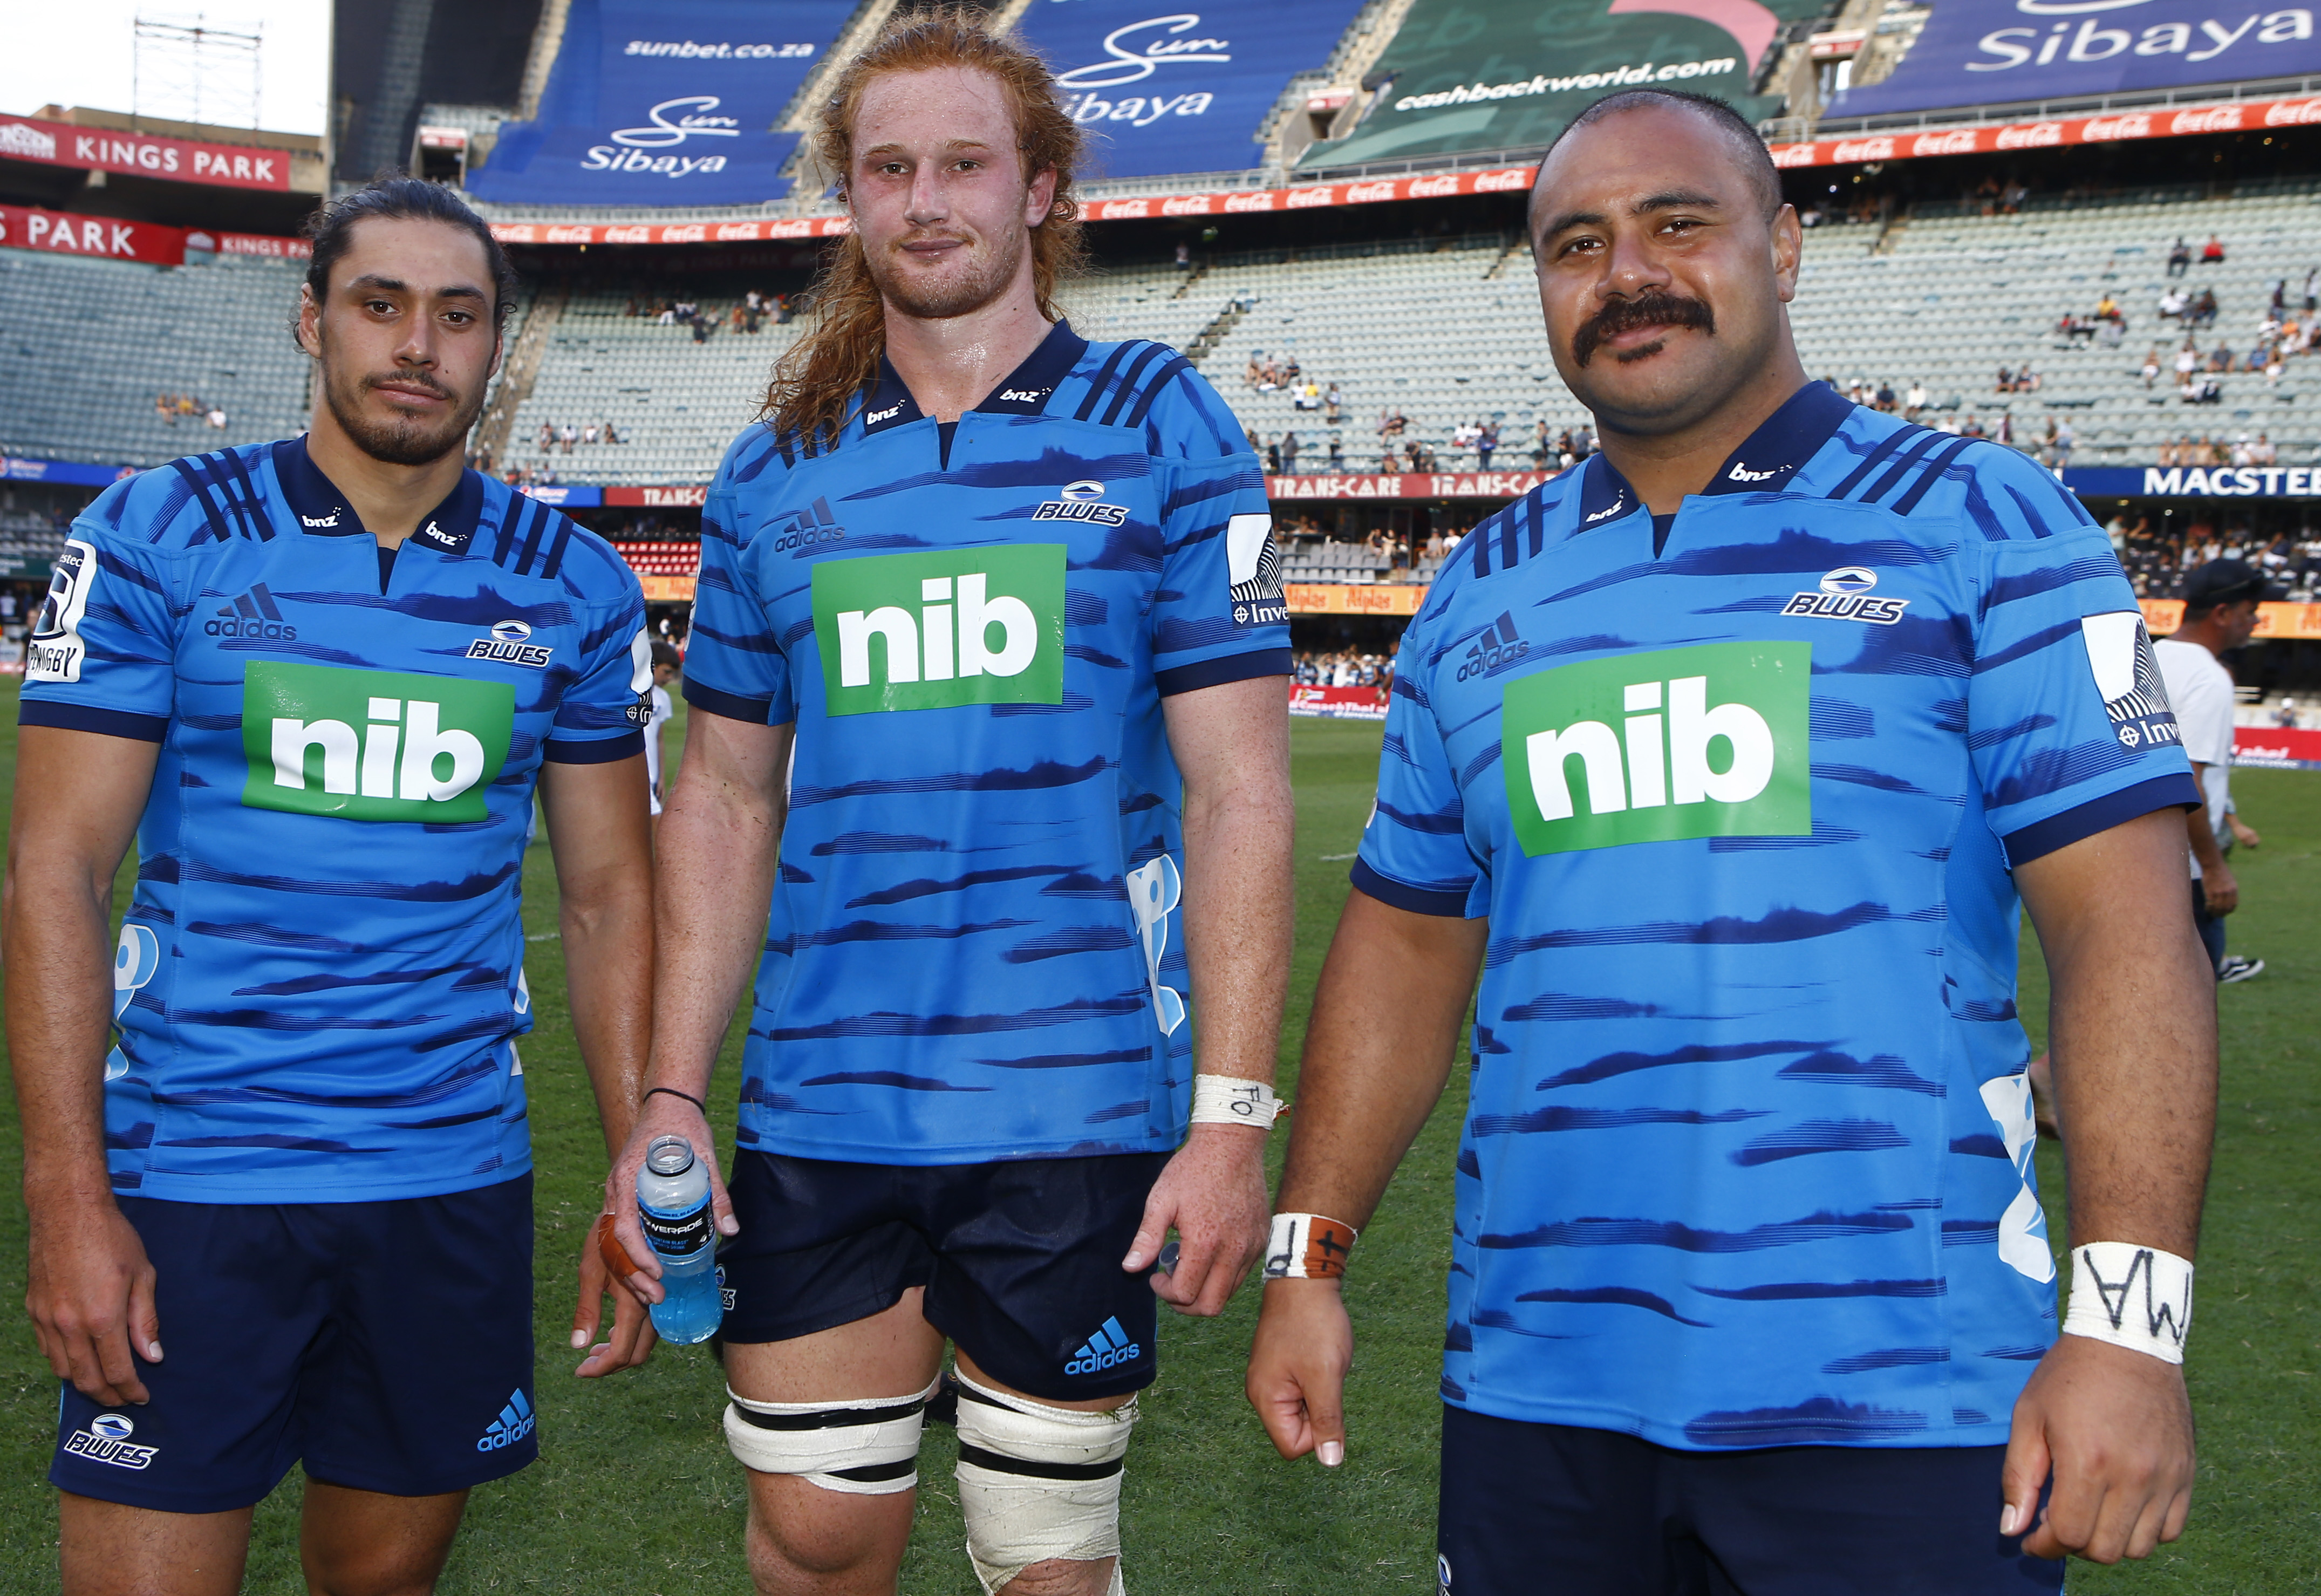 blues super rugby jersey 2020